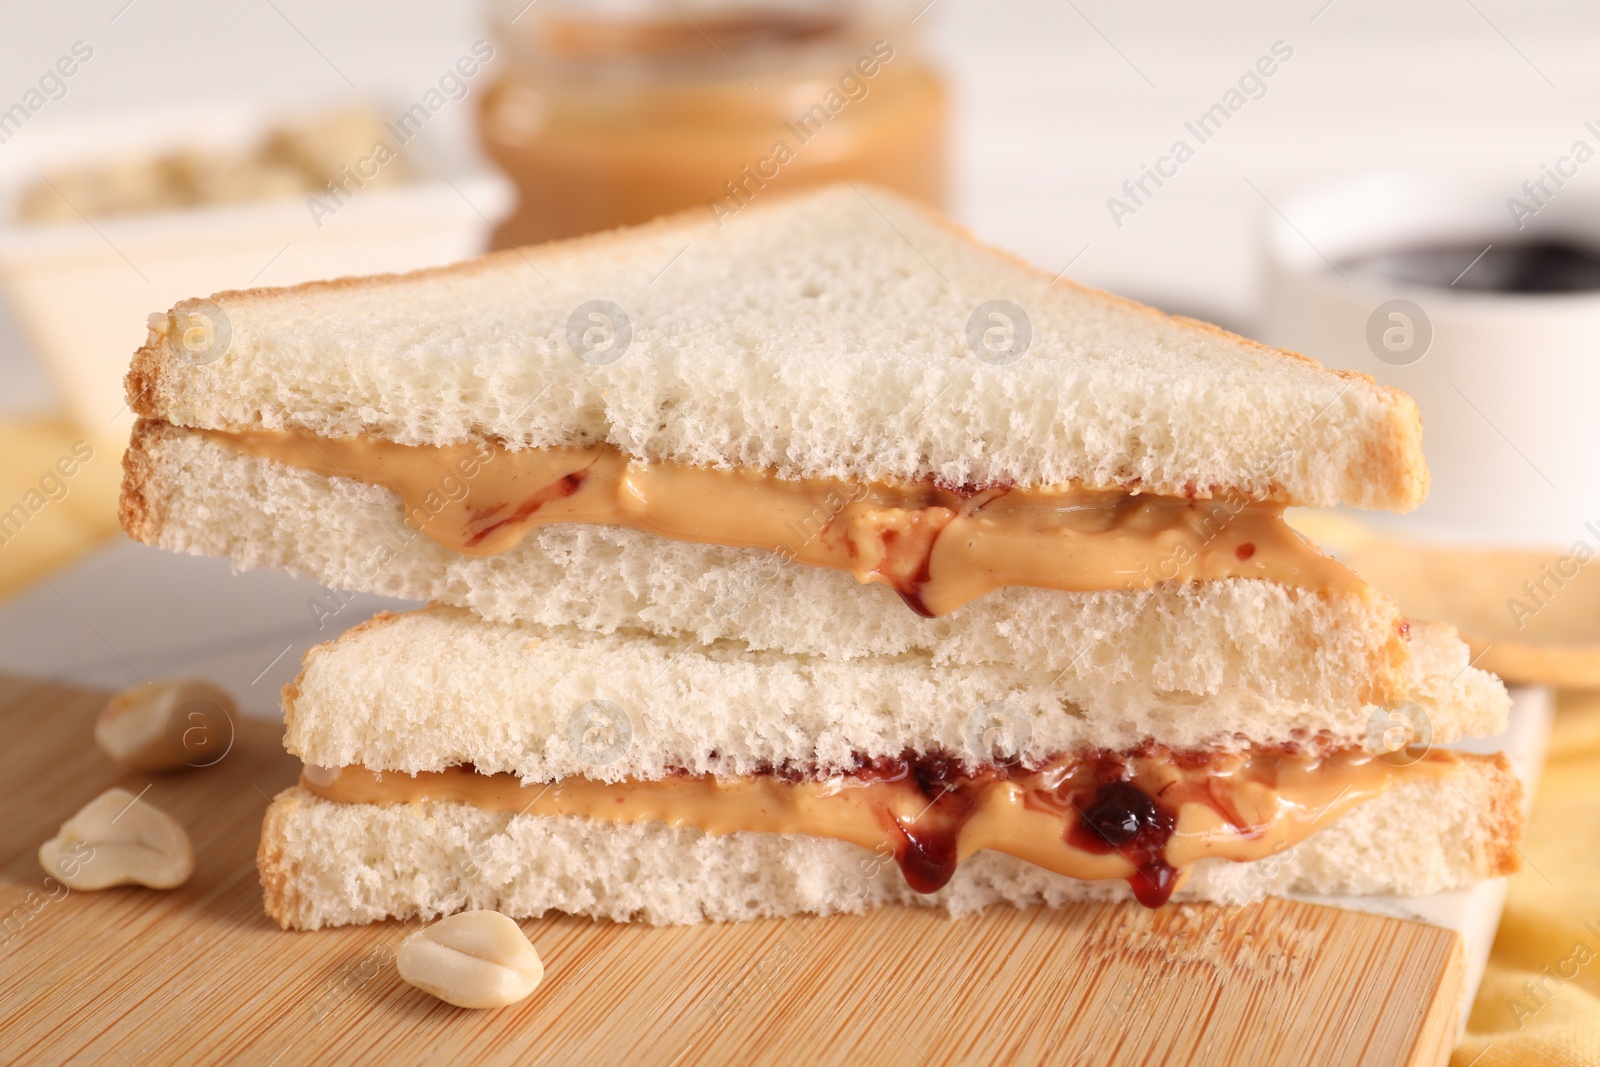 Photo of Sandwich with tasty nut butter and jam on wooden board, closeup